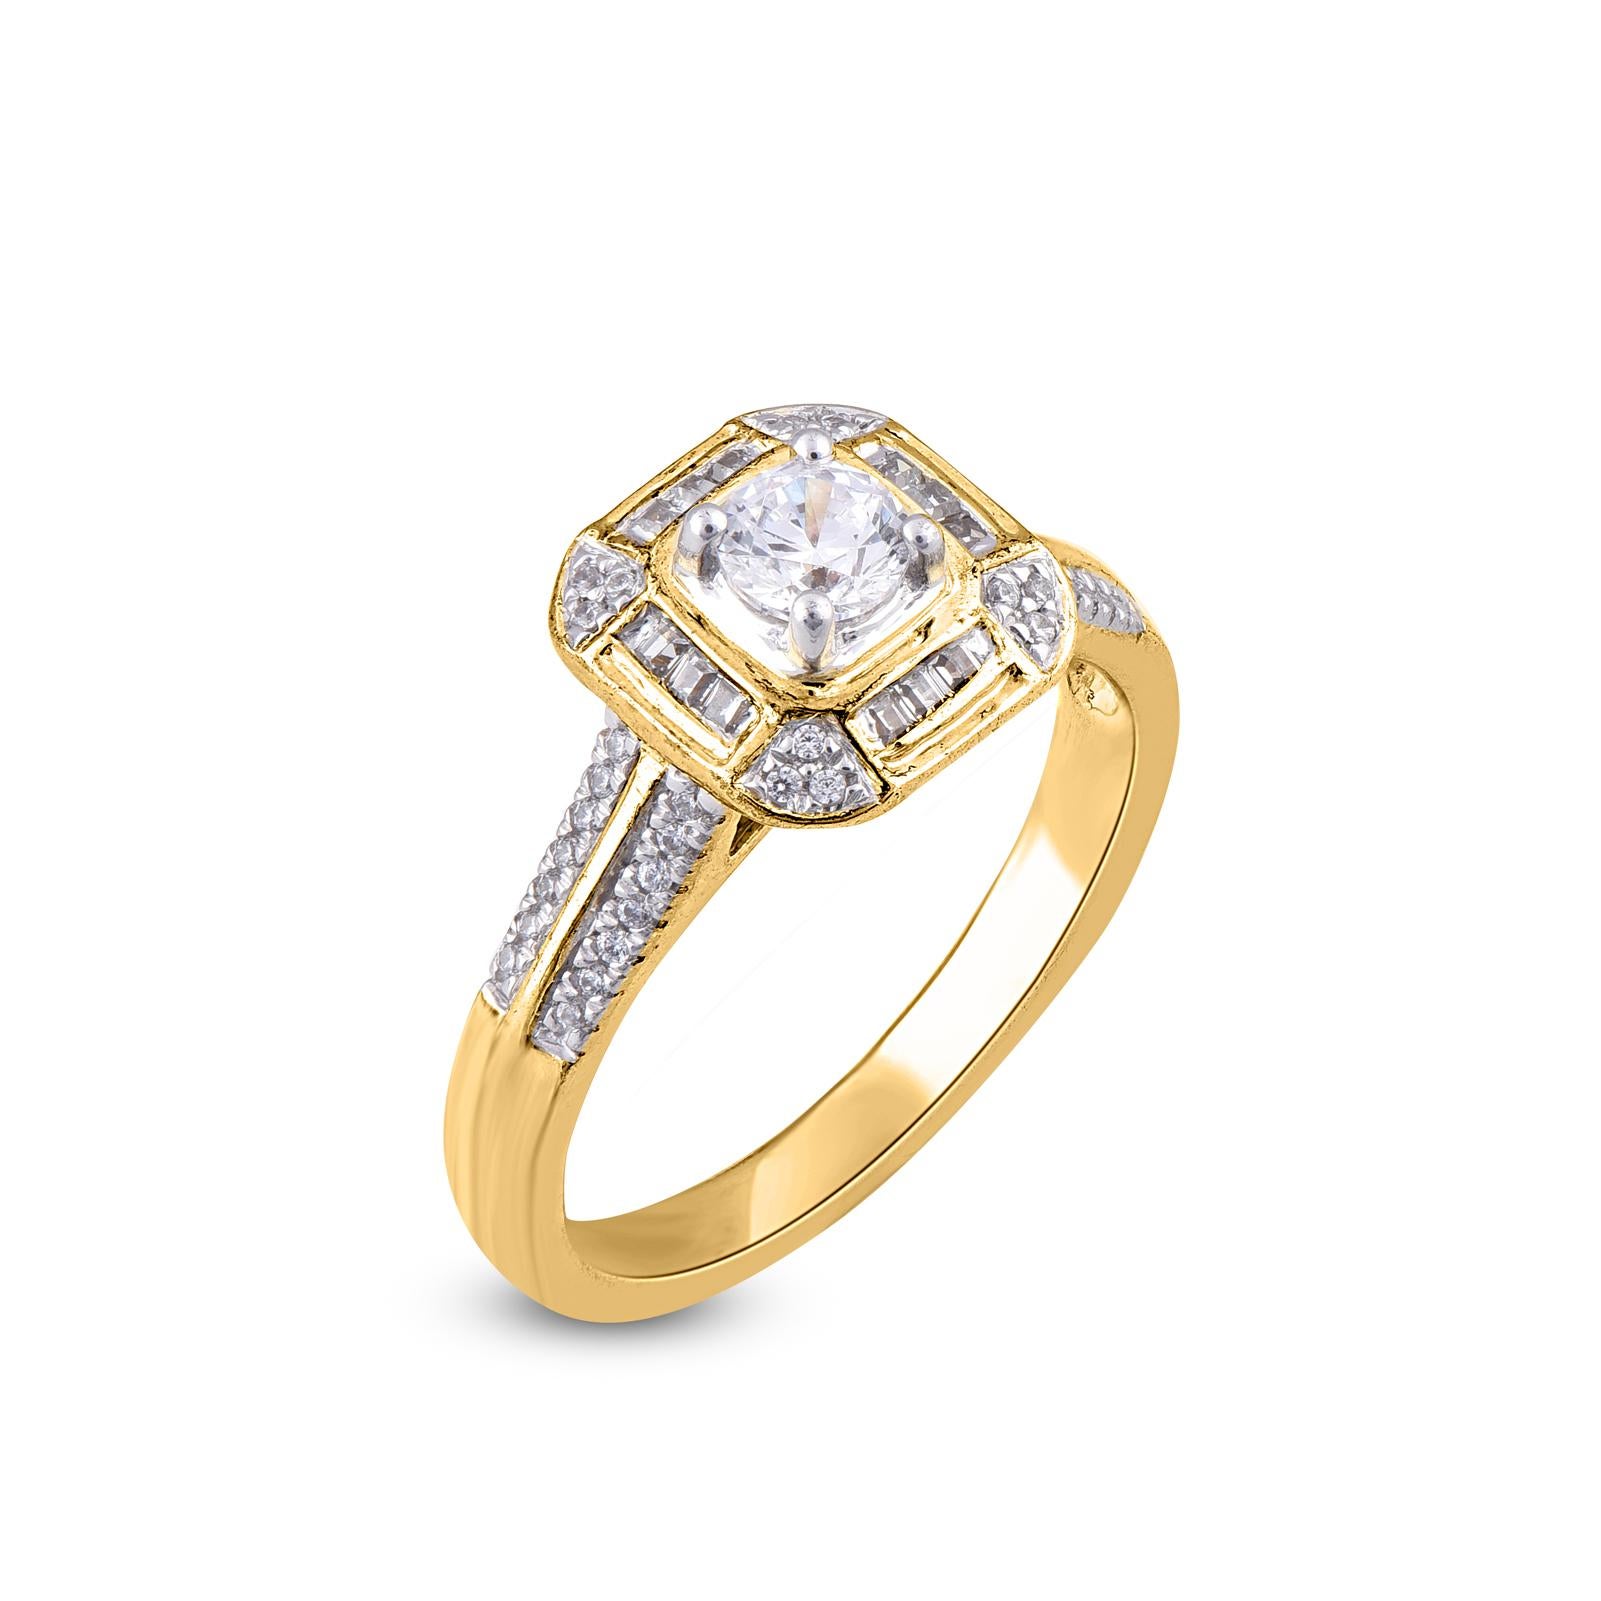 This ring is studded with 0.30ct center stone and 0.20ct of 36 round and 16 baguette diamonds elegantly set in prong, pave and channel setting and made by our experts in 18 karat Yellow gold, diamonds are graded G-H Color, SI1 Clarity. This is a